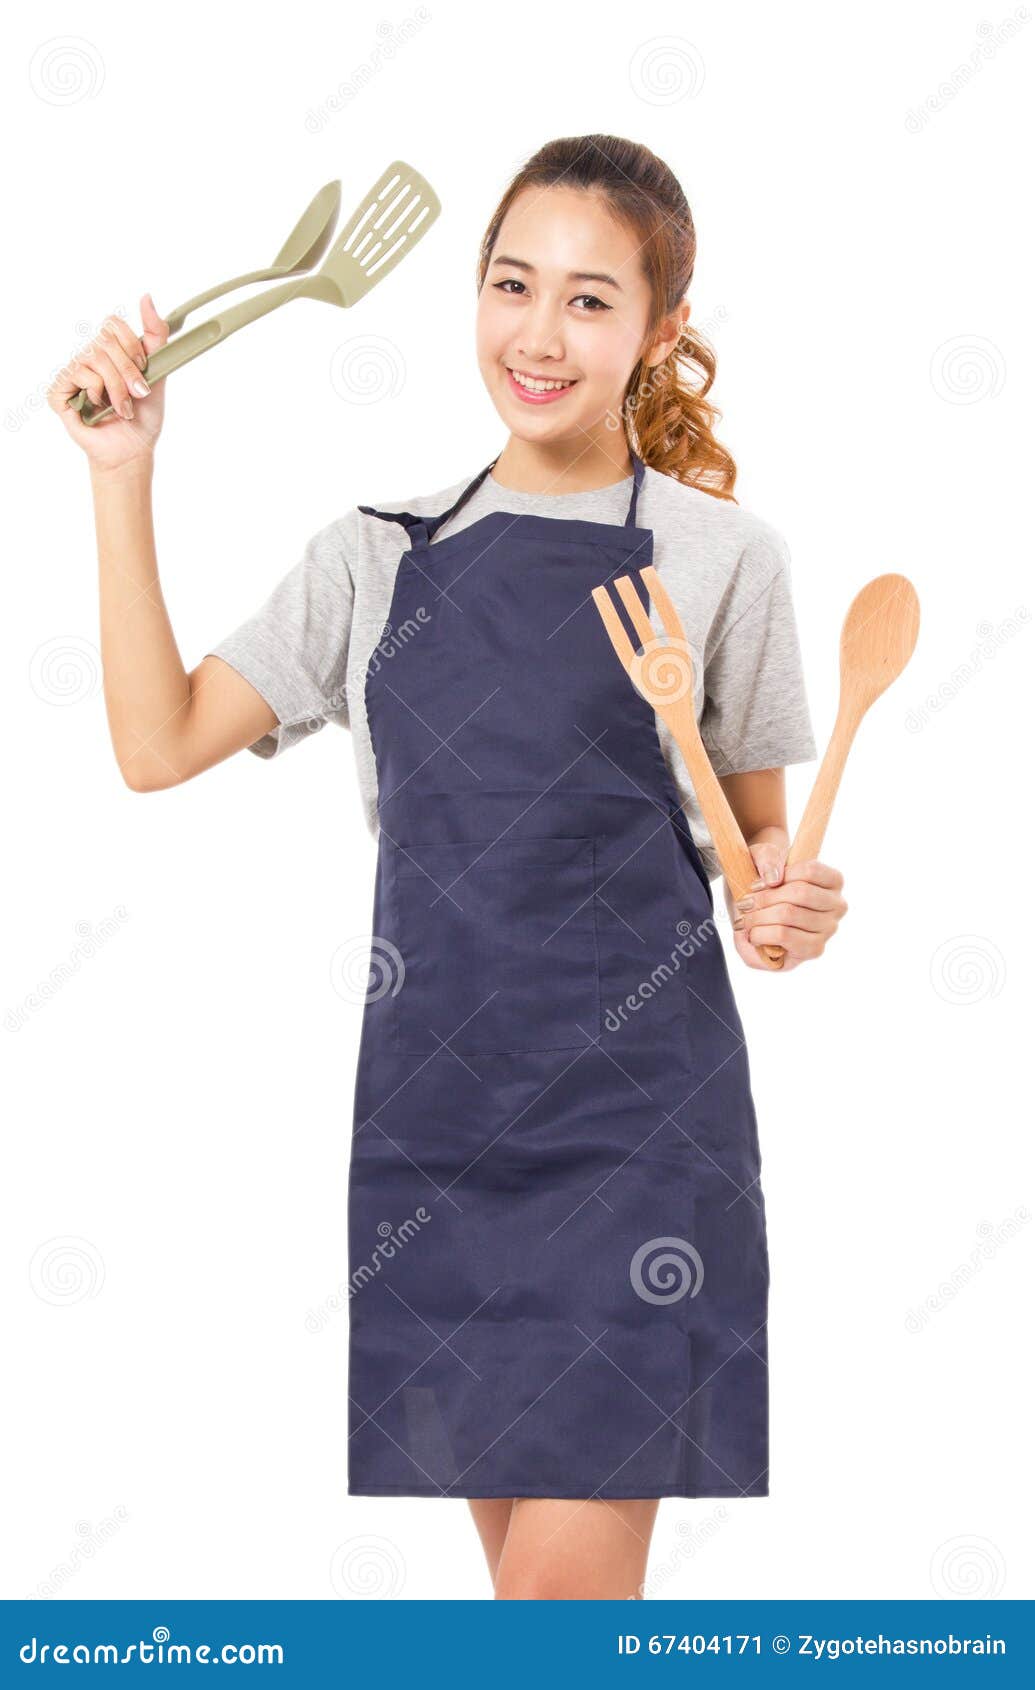 asian woman wearing apron and showing cooking tools.